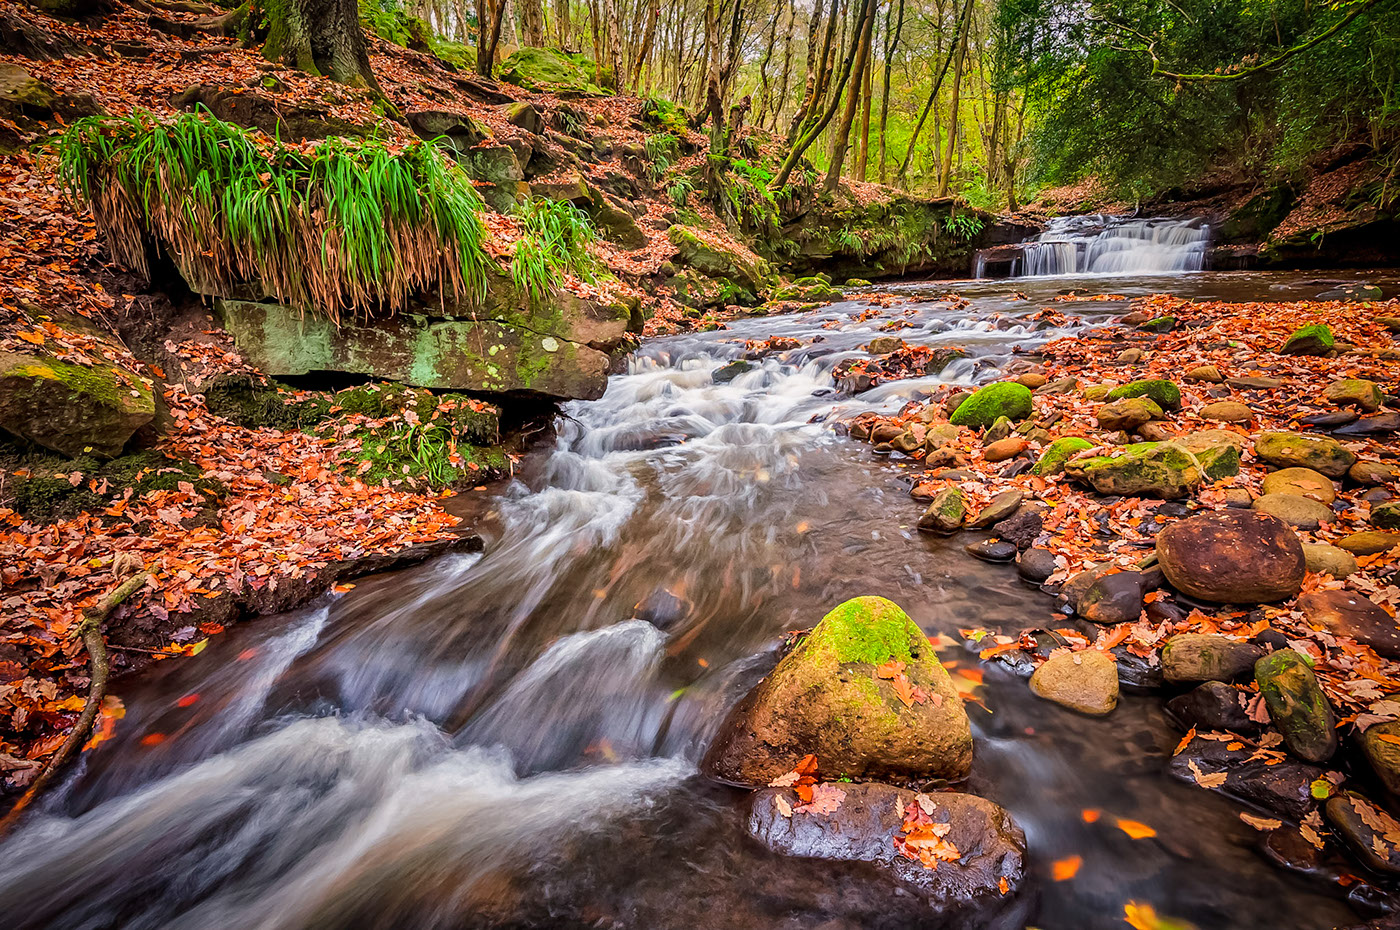 Landscape Nature outdoors waterfall autumn water falls river stream yorkshire